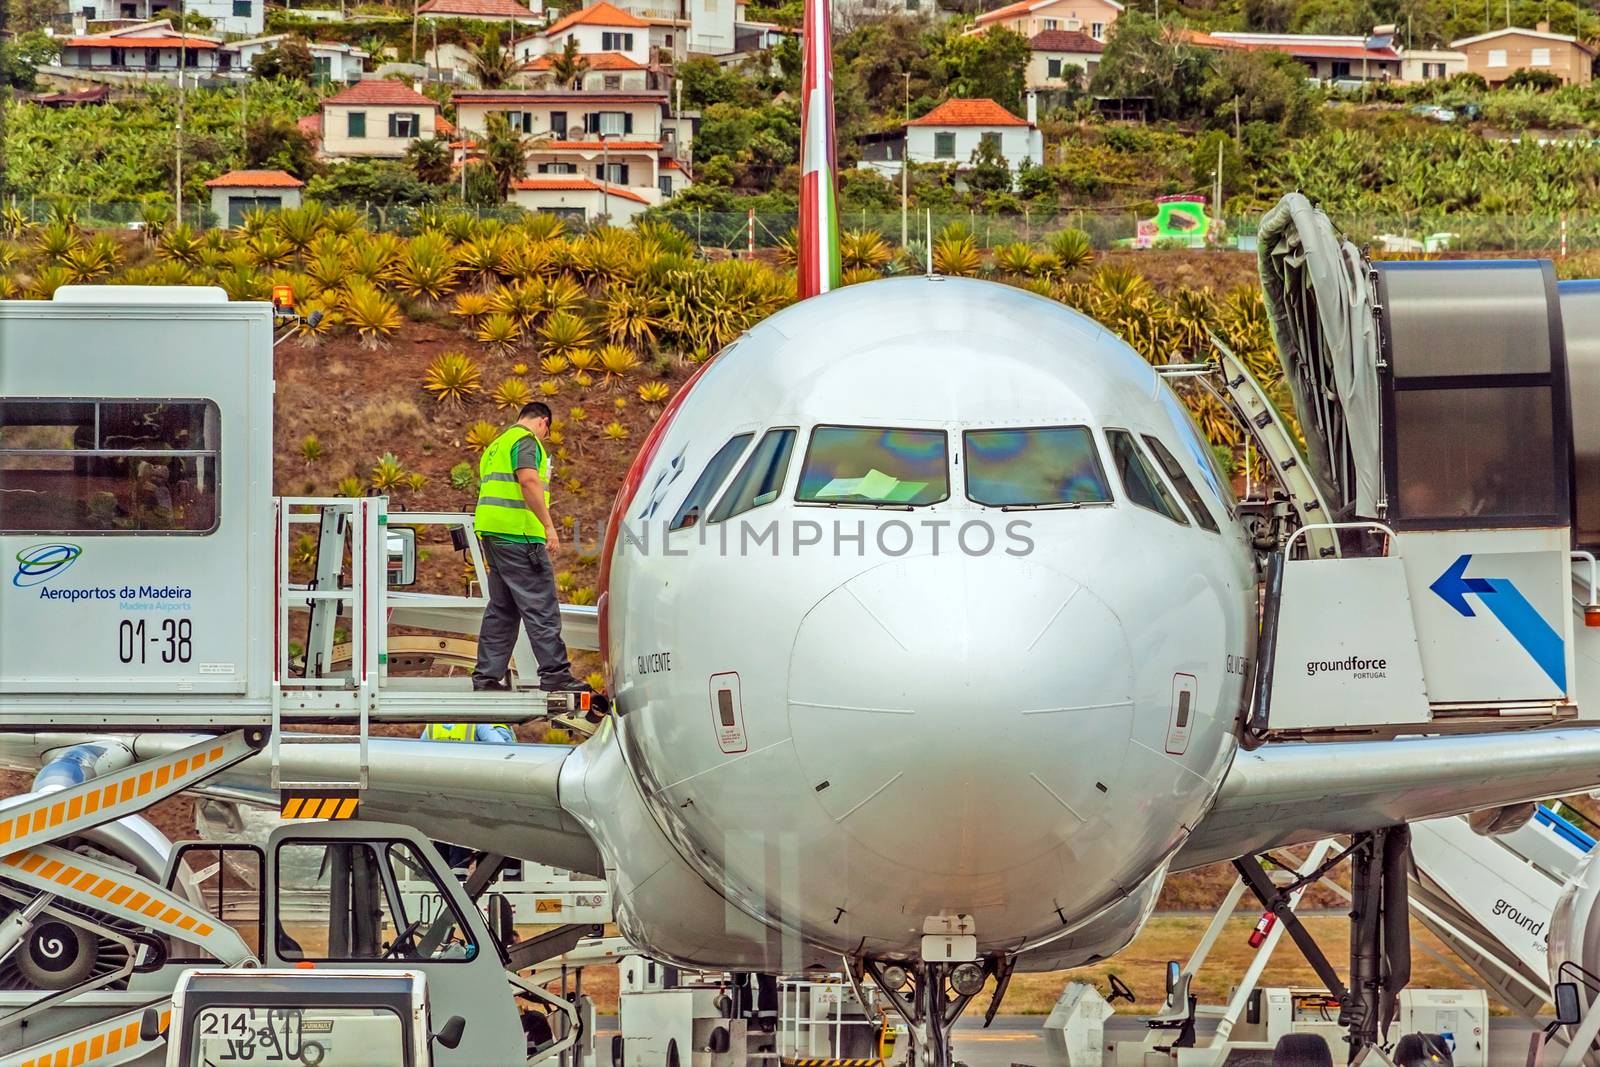 Funchal, Madeira, Portugal - May 30, 2013: At the airport of Madeira (Aeroporto Madeira) - an airplane Airbus A320 from TAP Portugal Airline in parking position. Ground force stuff at work.